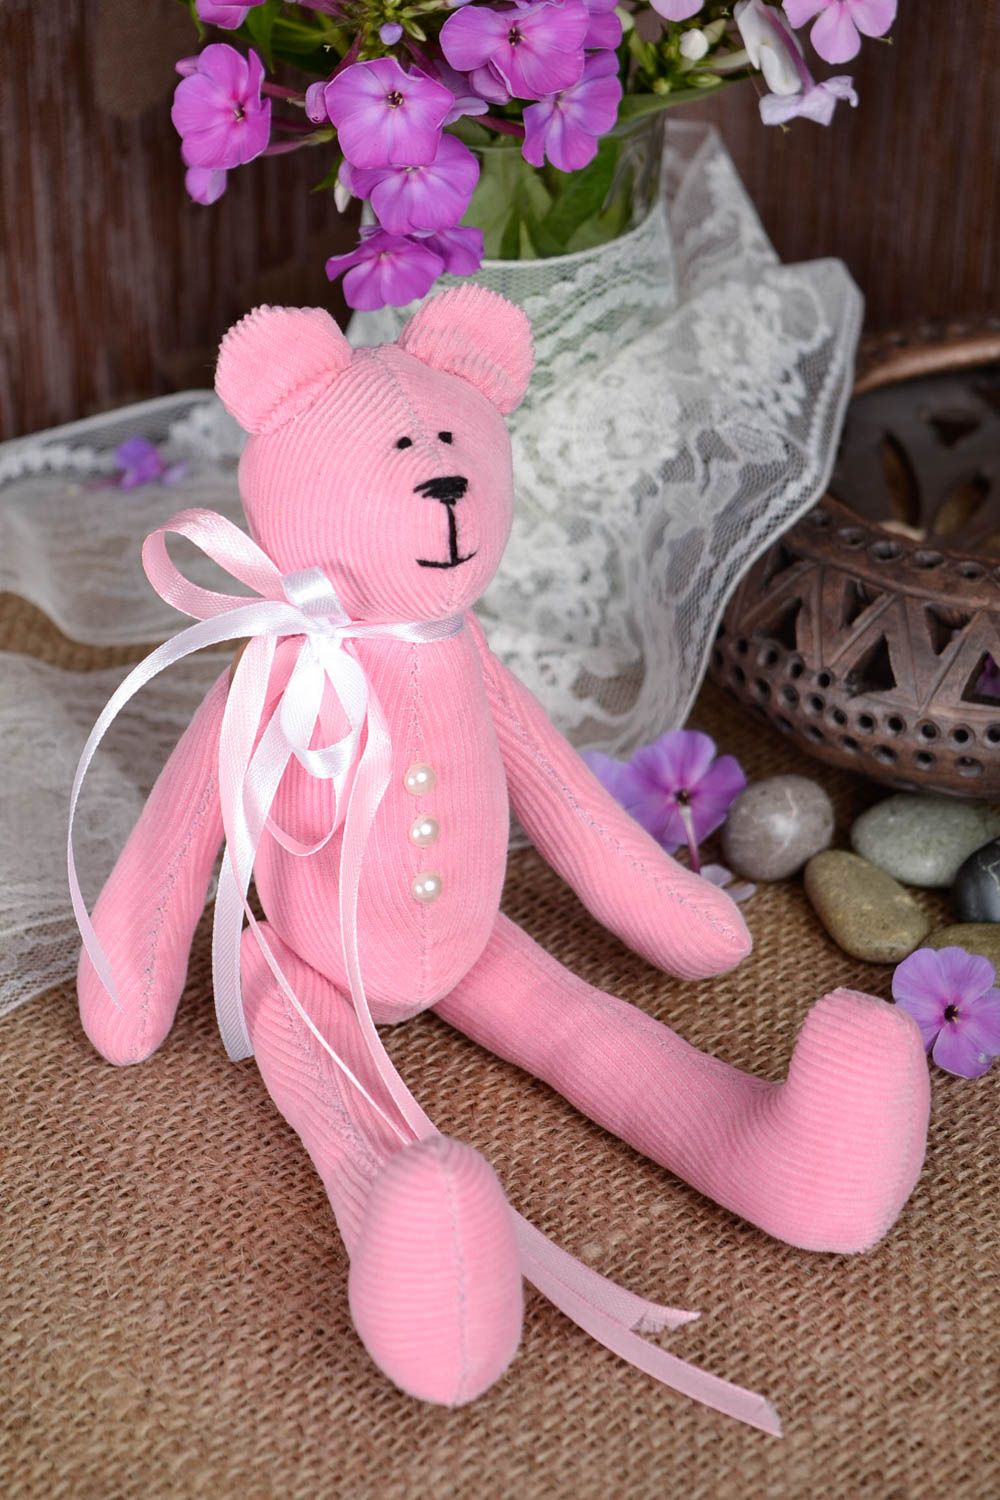 Soft toy bear toy homemade toy cuddly toys handmade gifts interior decorations photo 1